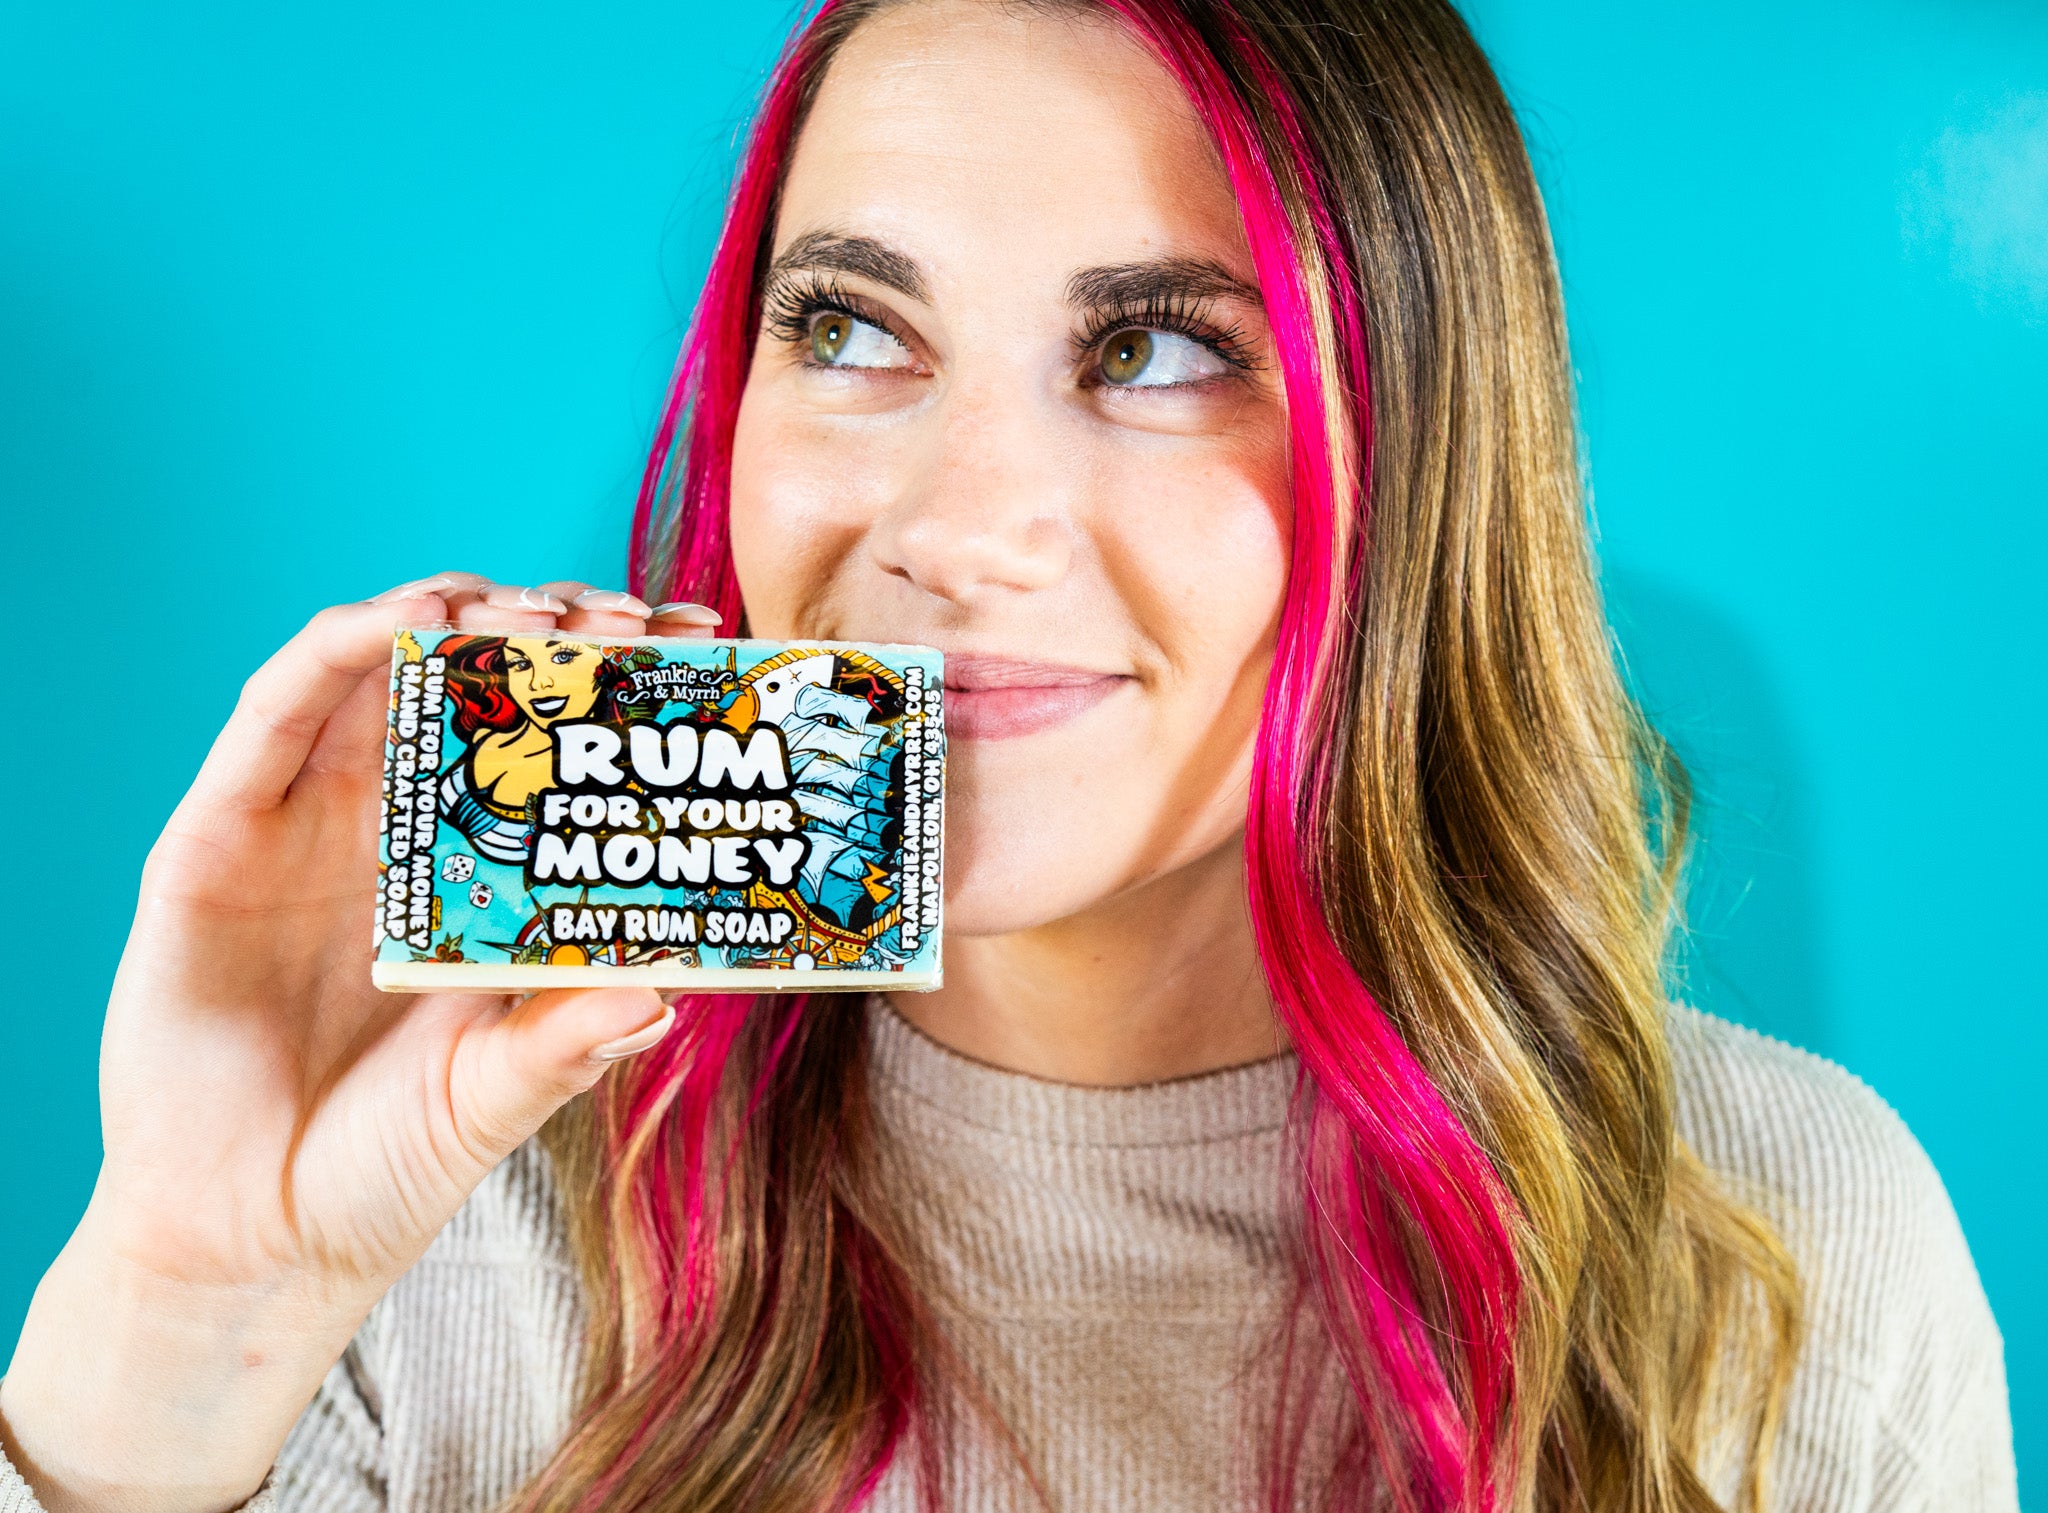 Rum for your Money Soap | Spicy Bay Rum Soap Bar